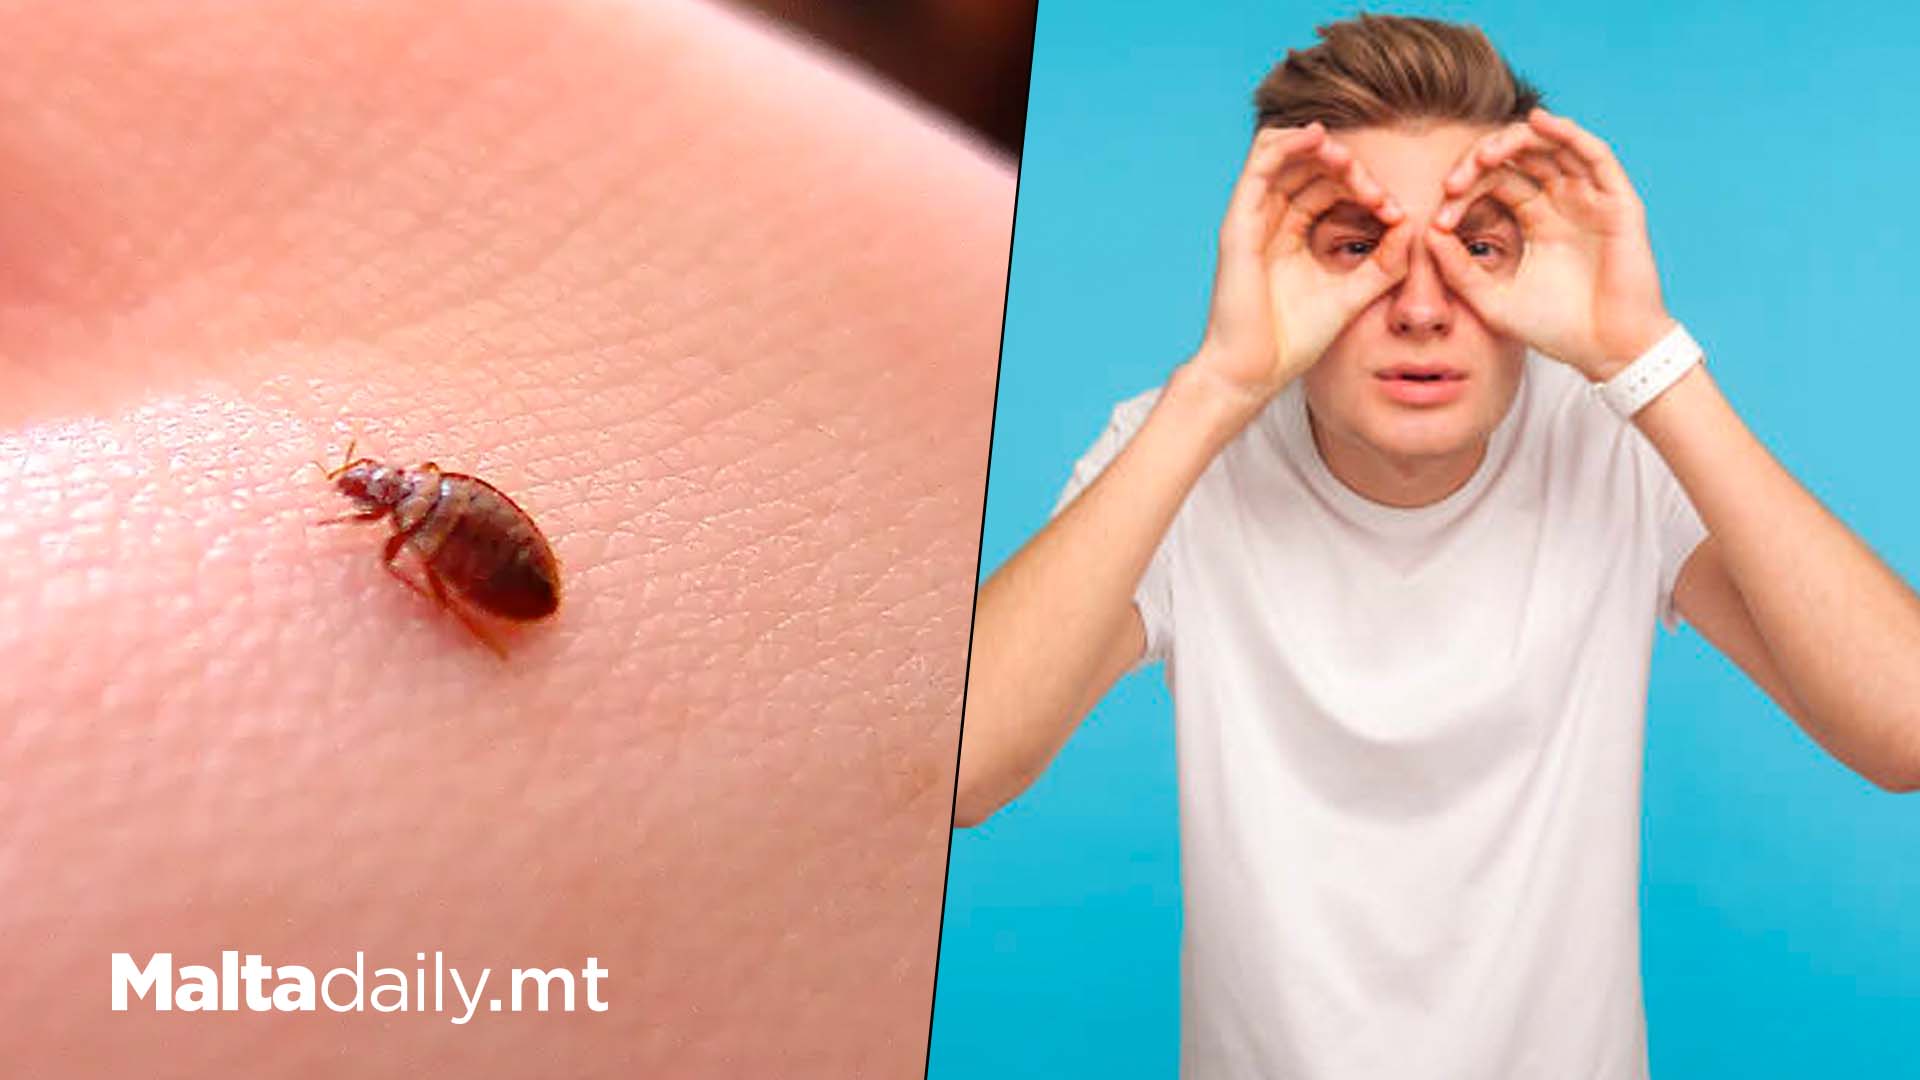 Ban Bed Bugs From Your Home With These Simple Tricks